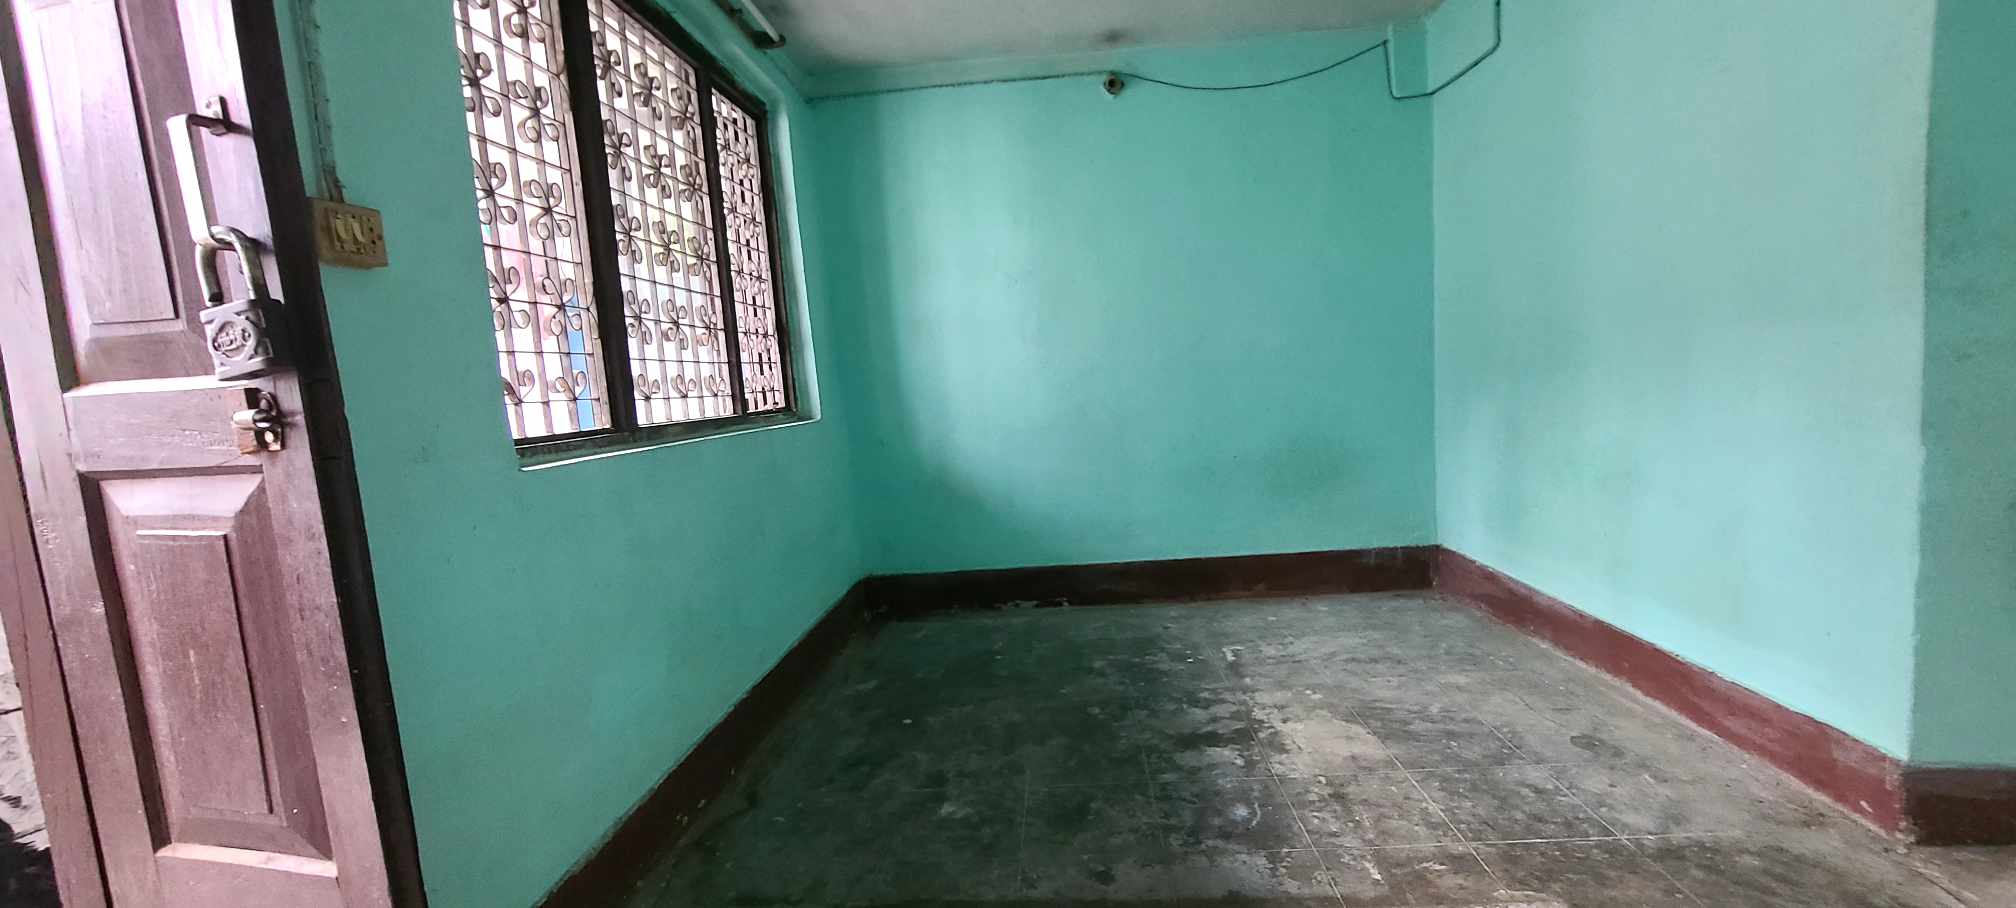 2 room rent in Baneshwor – Rs 7000